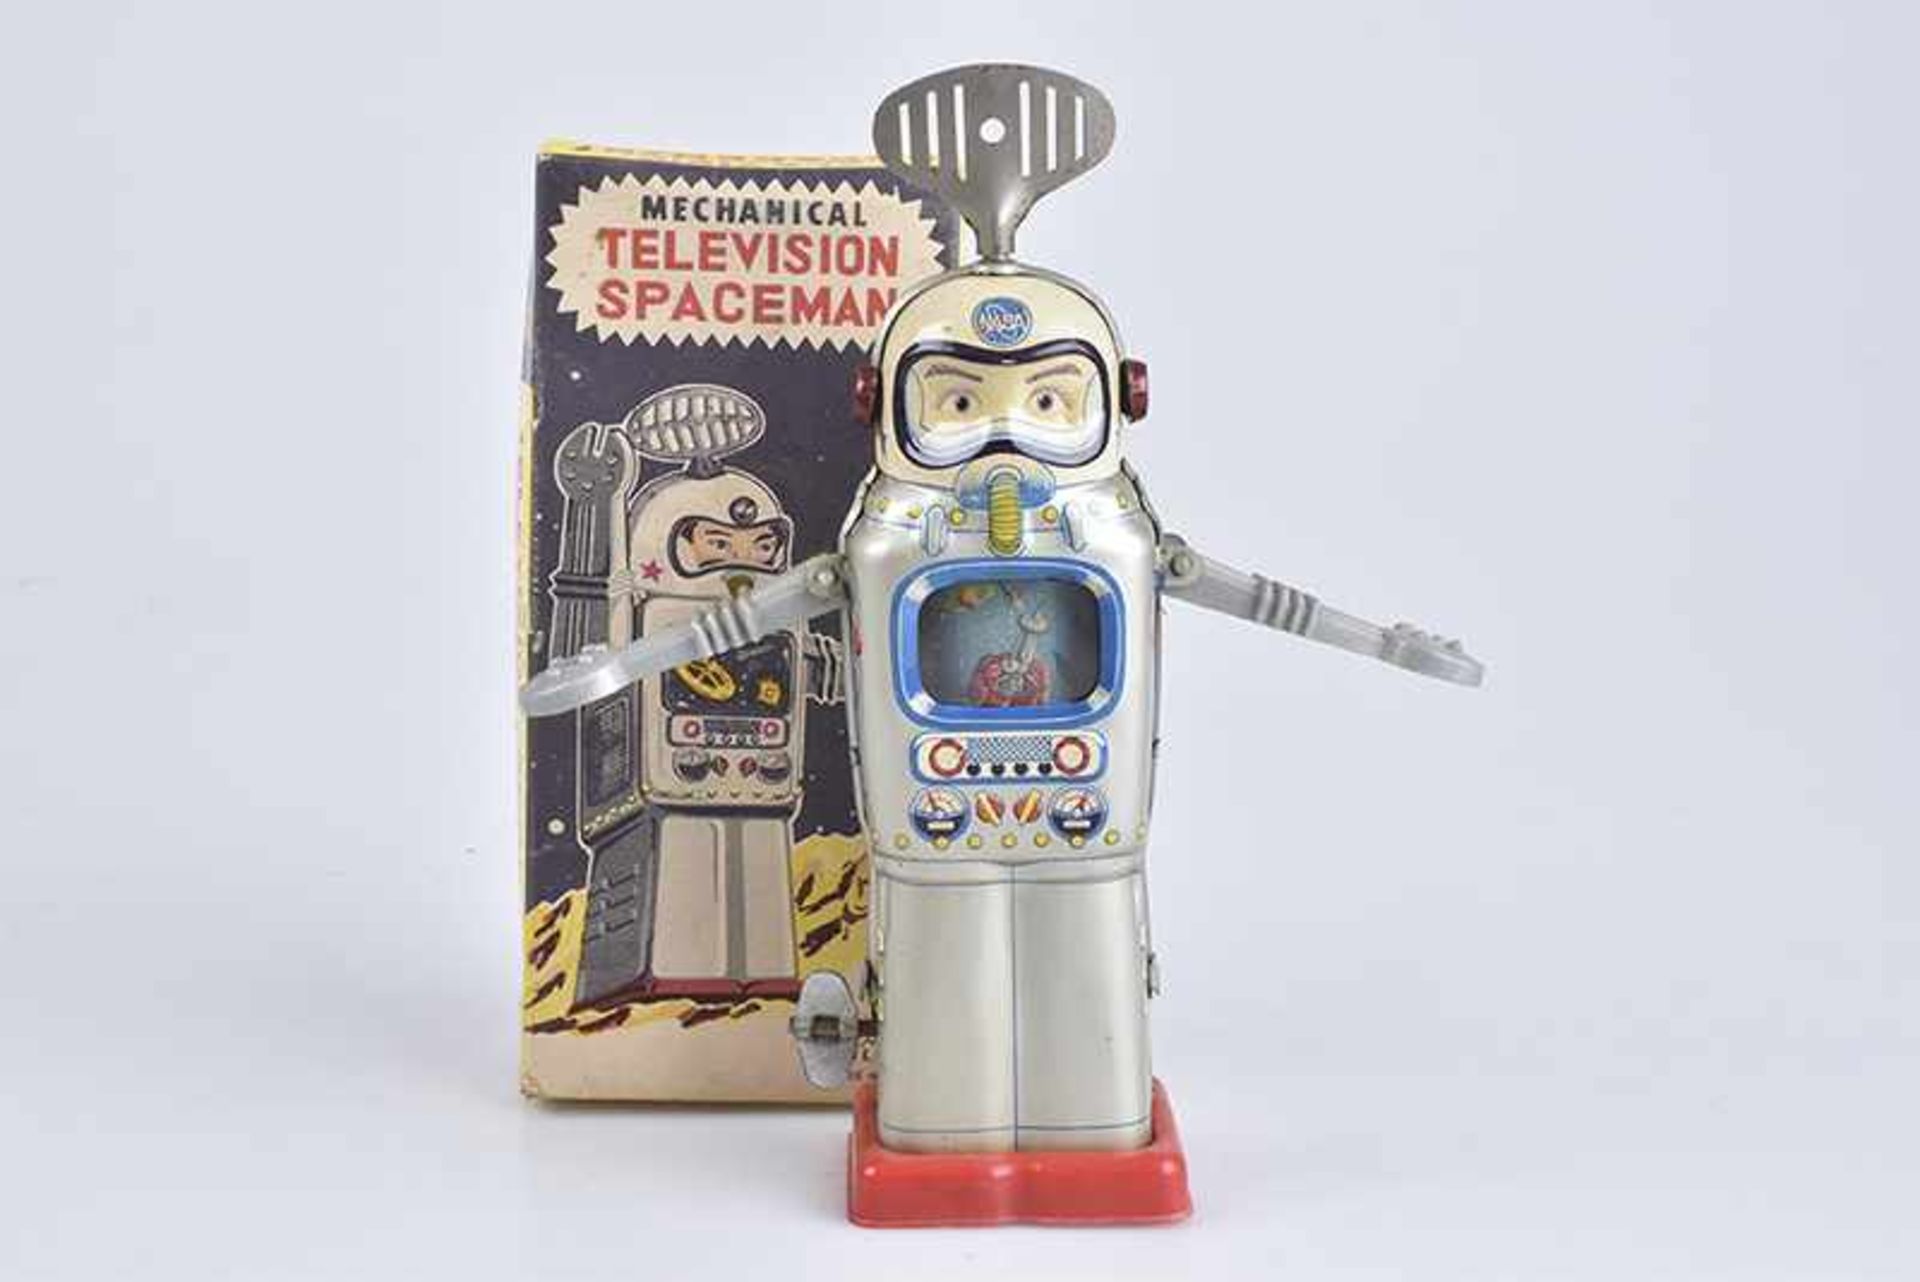 ALPS Television Spaceman, Made in Japan, 60er Jahre, Blech/ Kunststoff, lithographiert, H 16 cm,